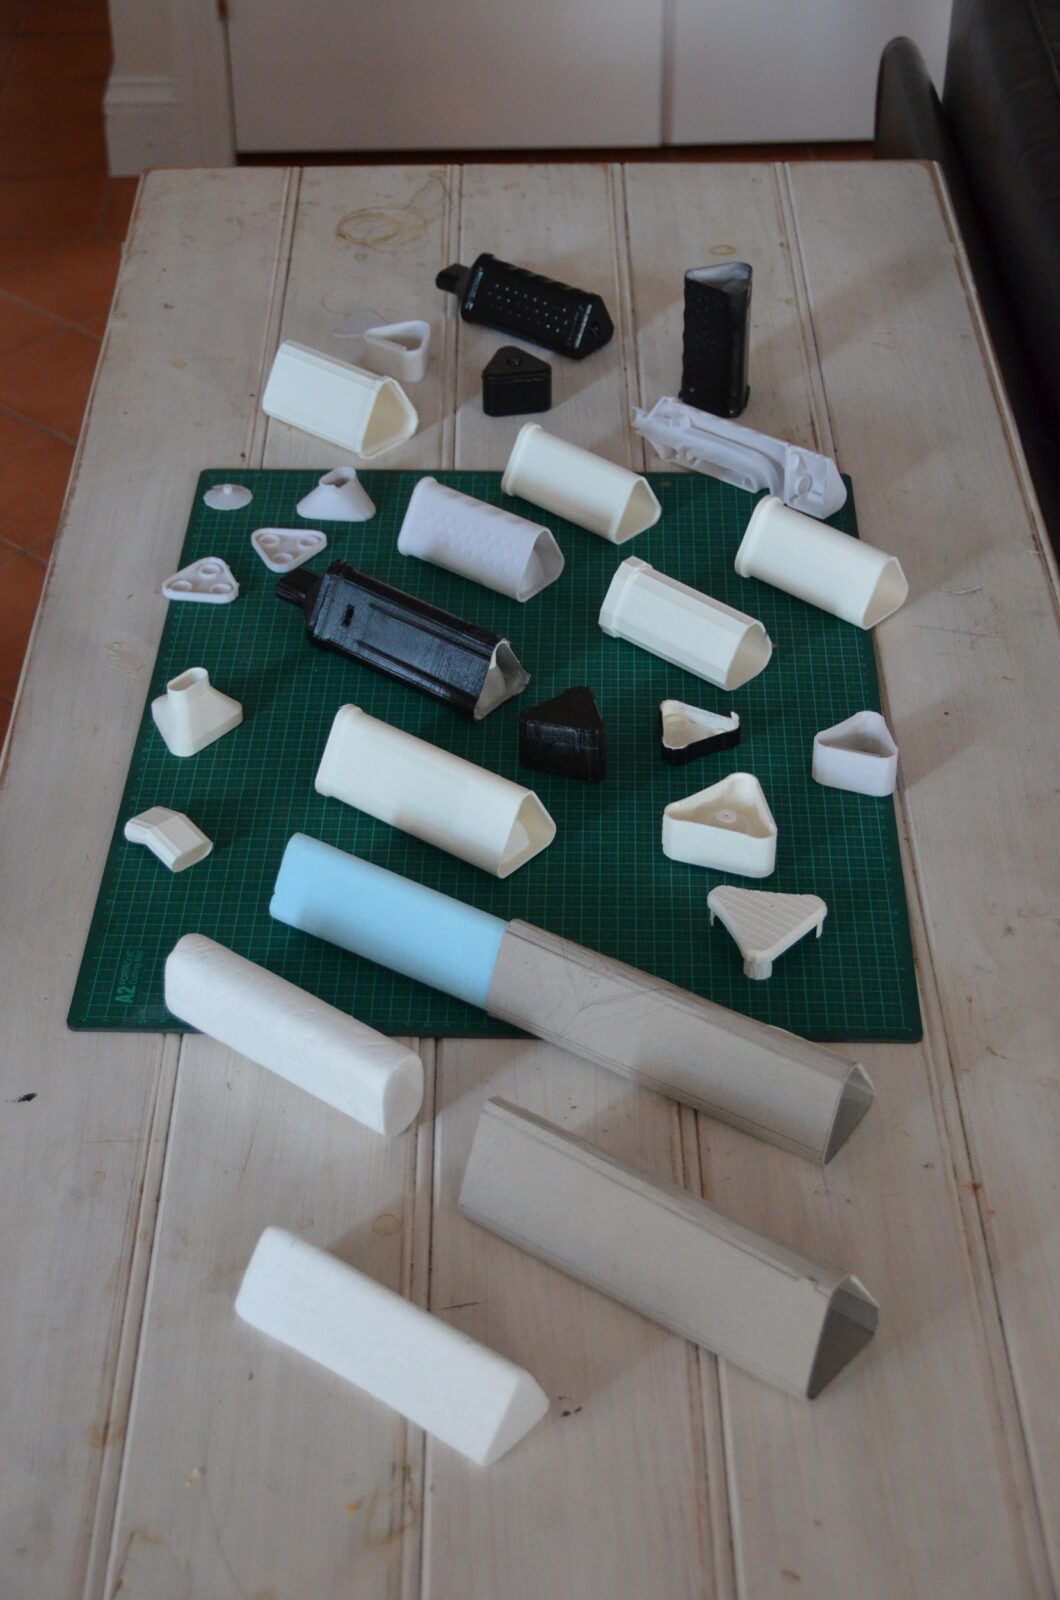 A photo of the prototype models throughout the course of the project.